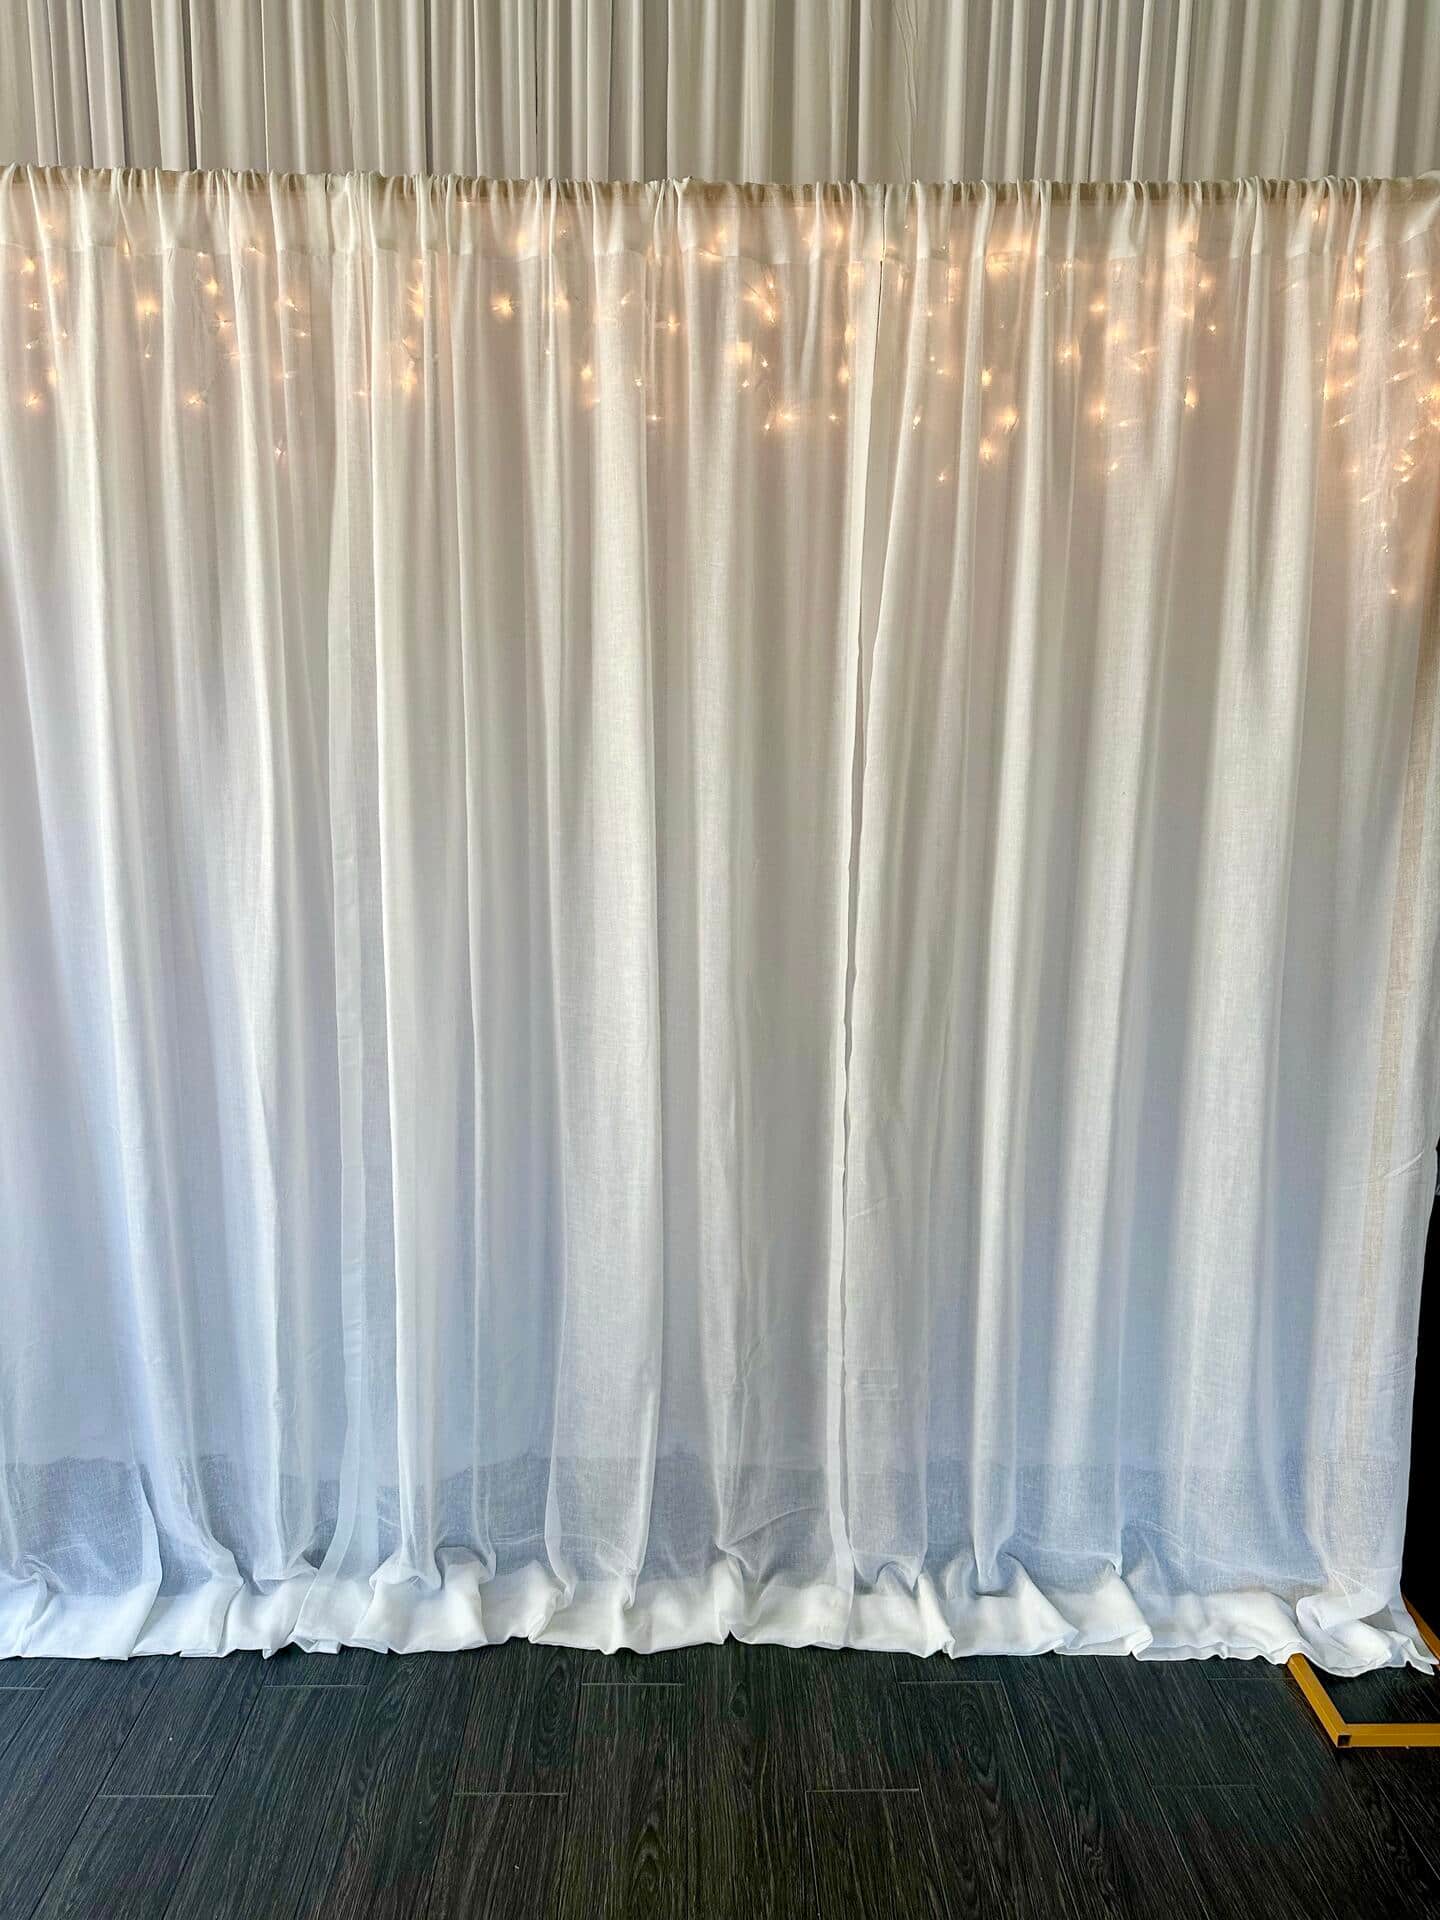 White curtains and string lights on a backdrop stand